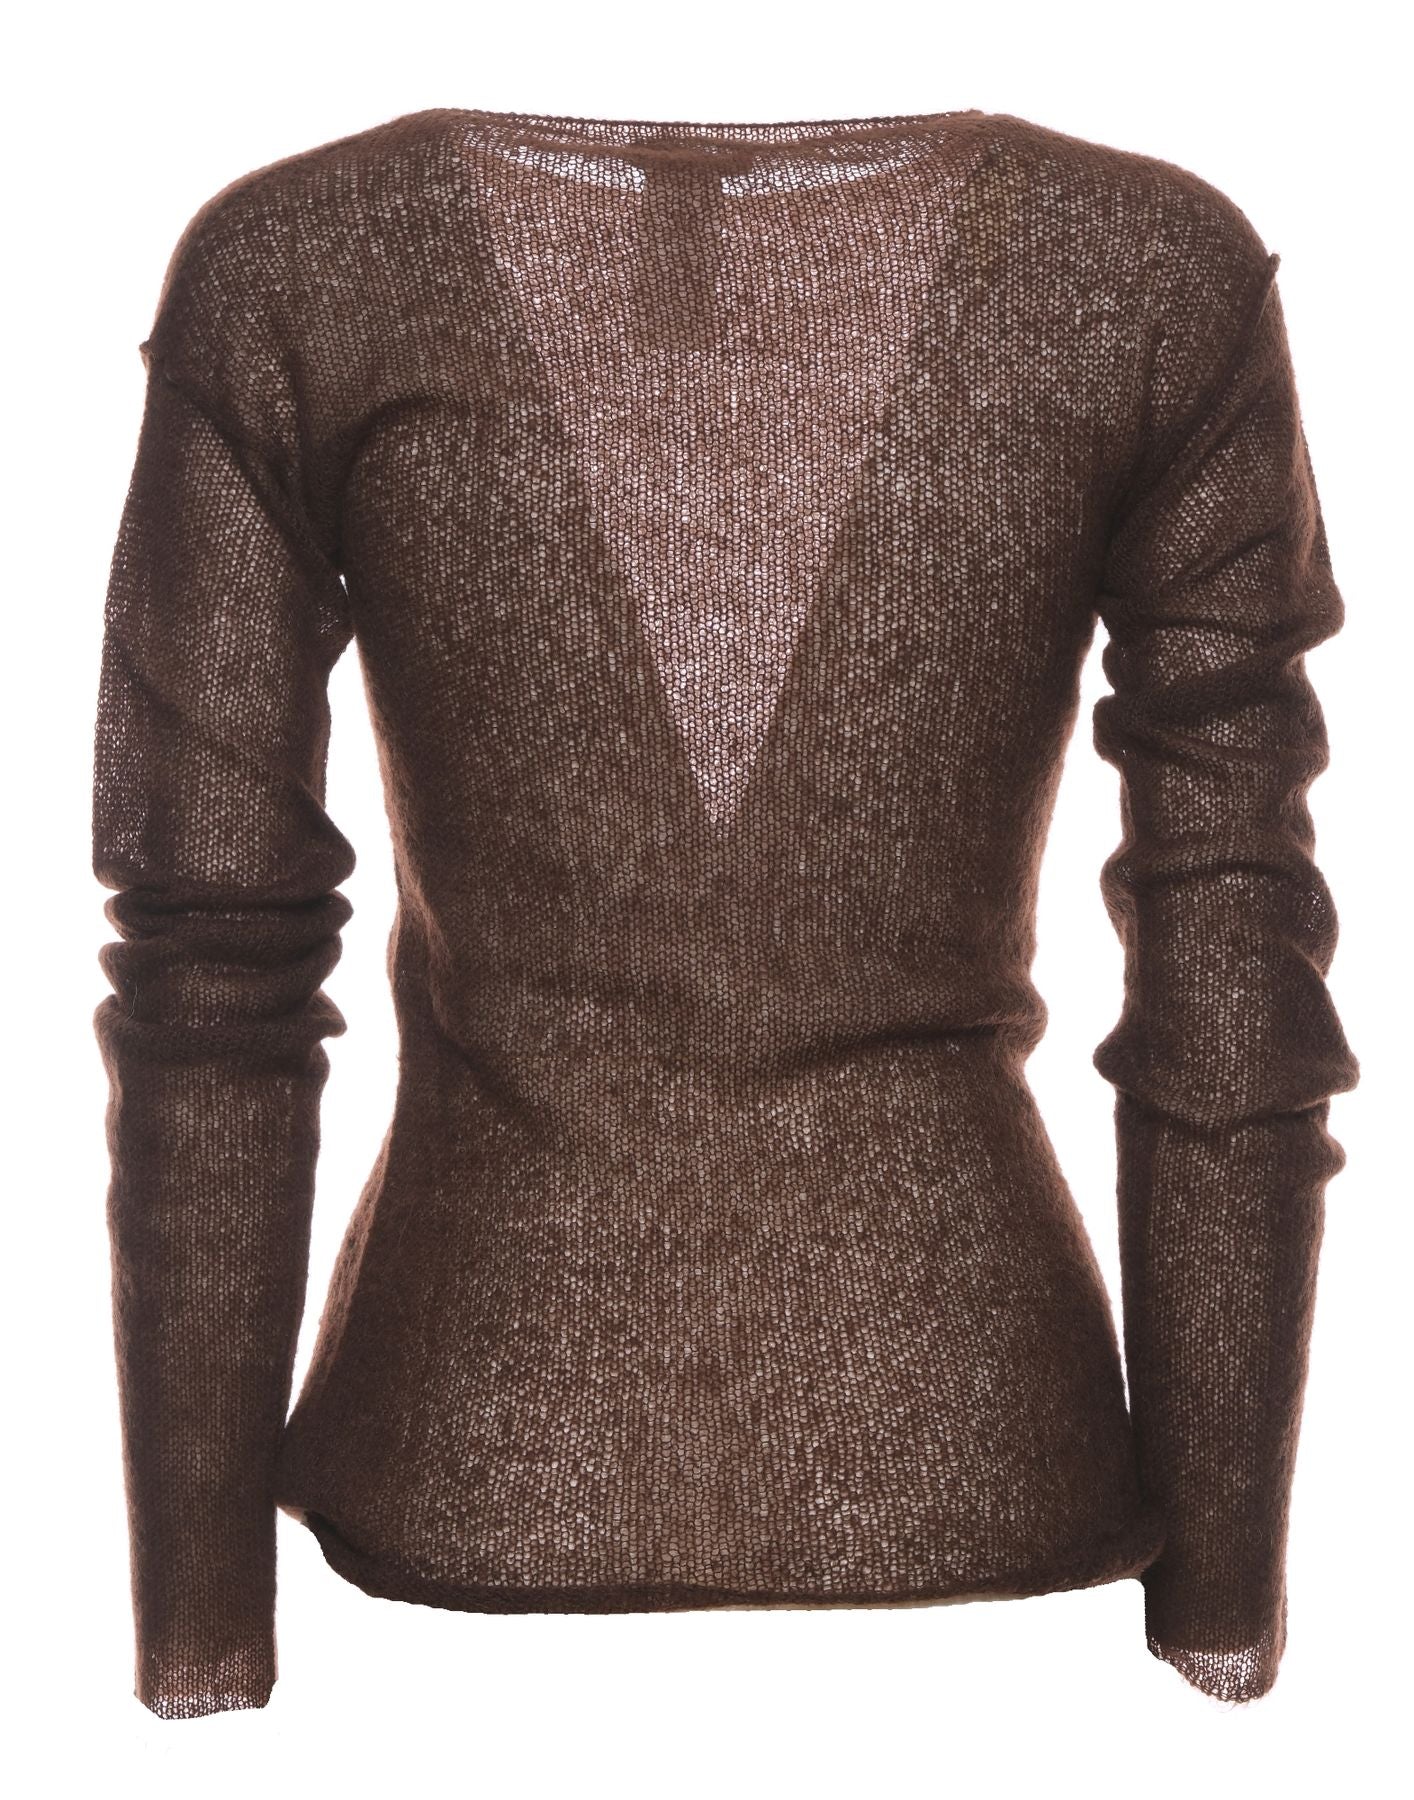 Sweater woman OASI 288 1171 TOFFEE Hanami D'or